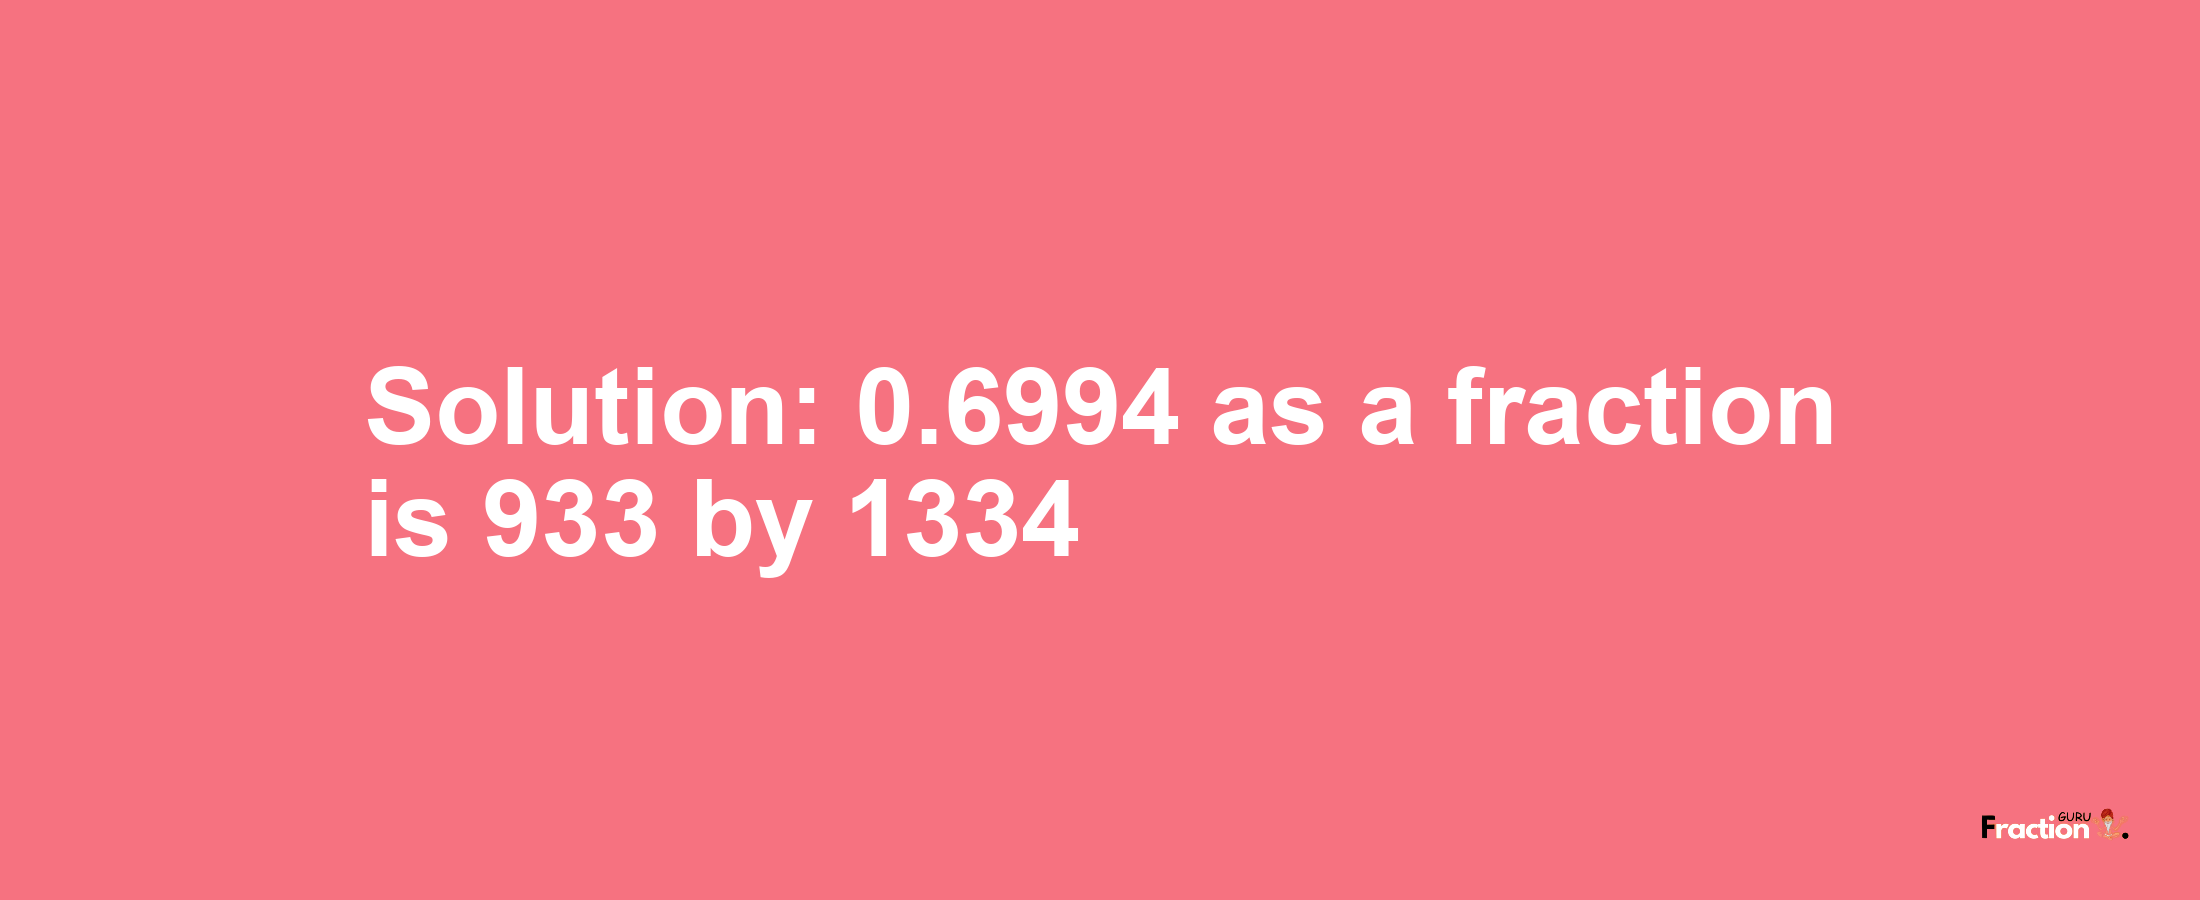 Solution:0.6994 as a fraction is 933/1334